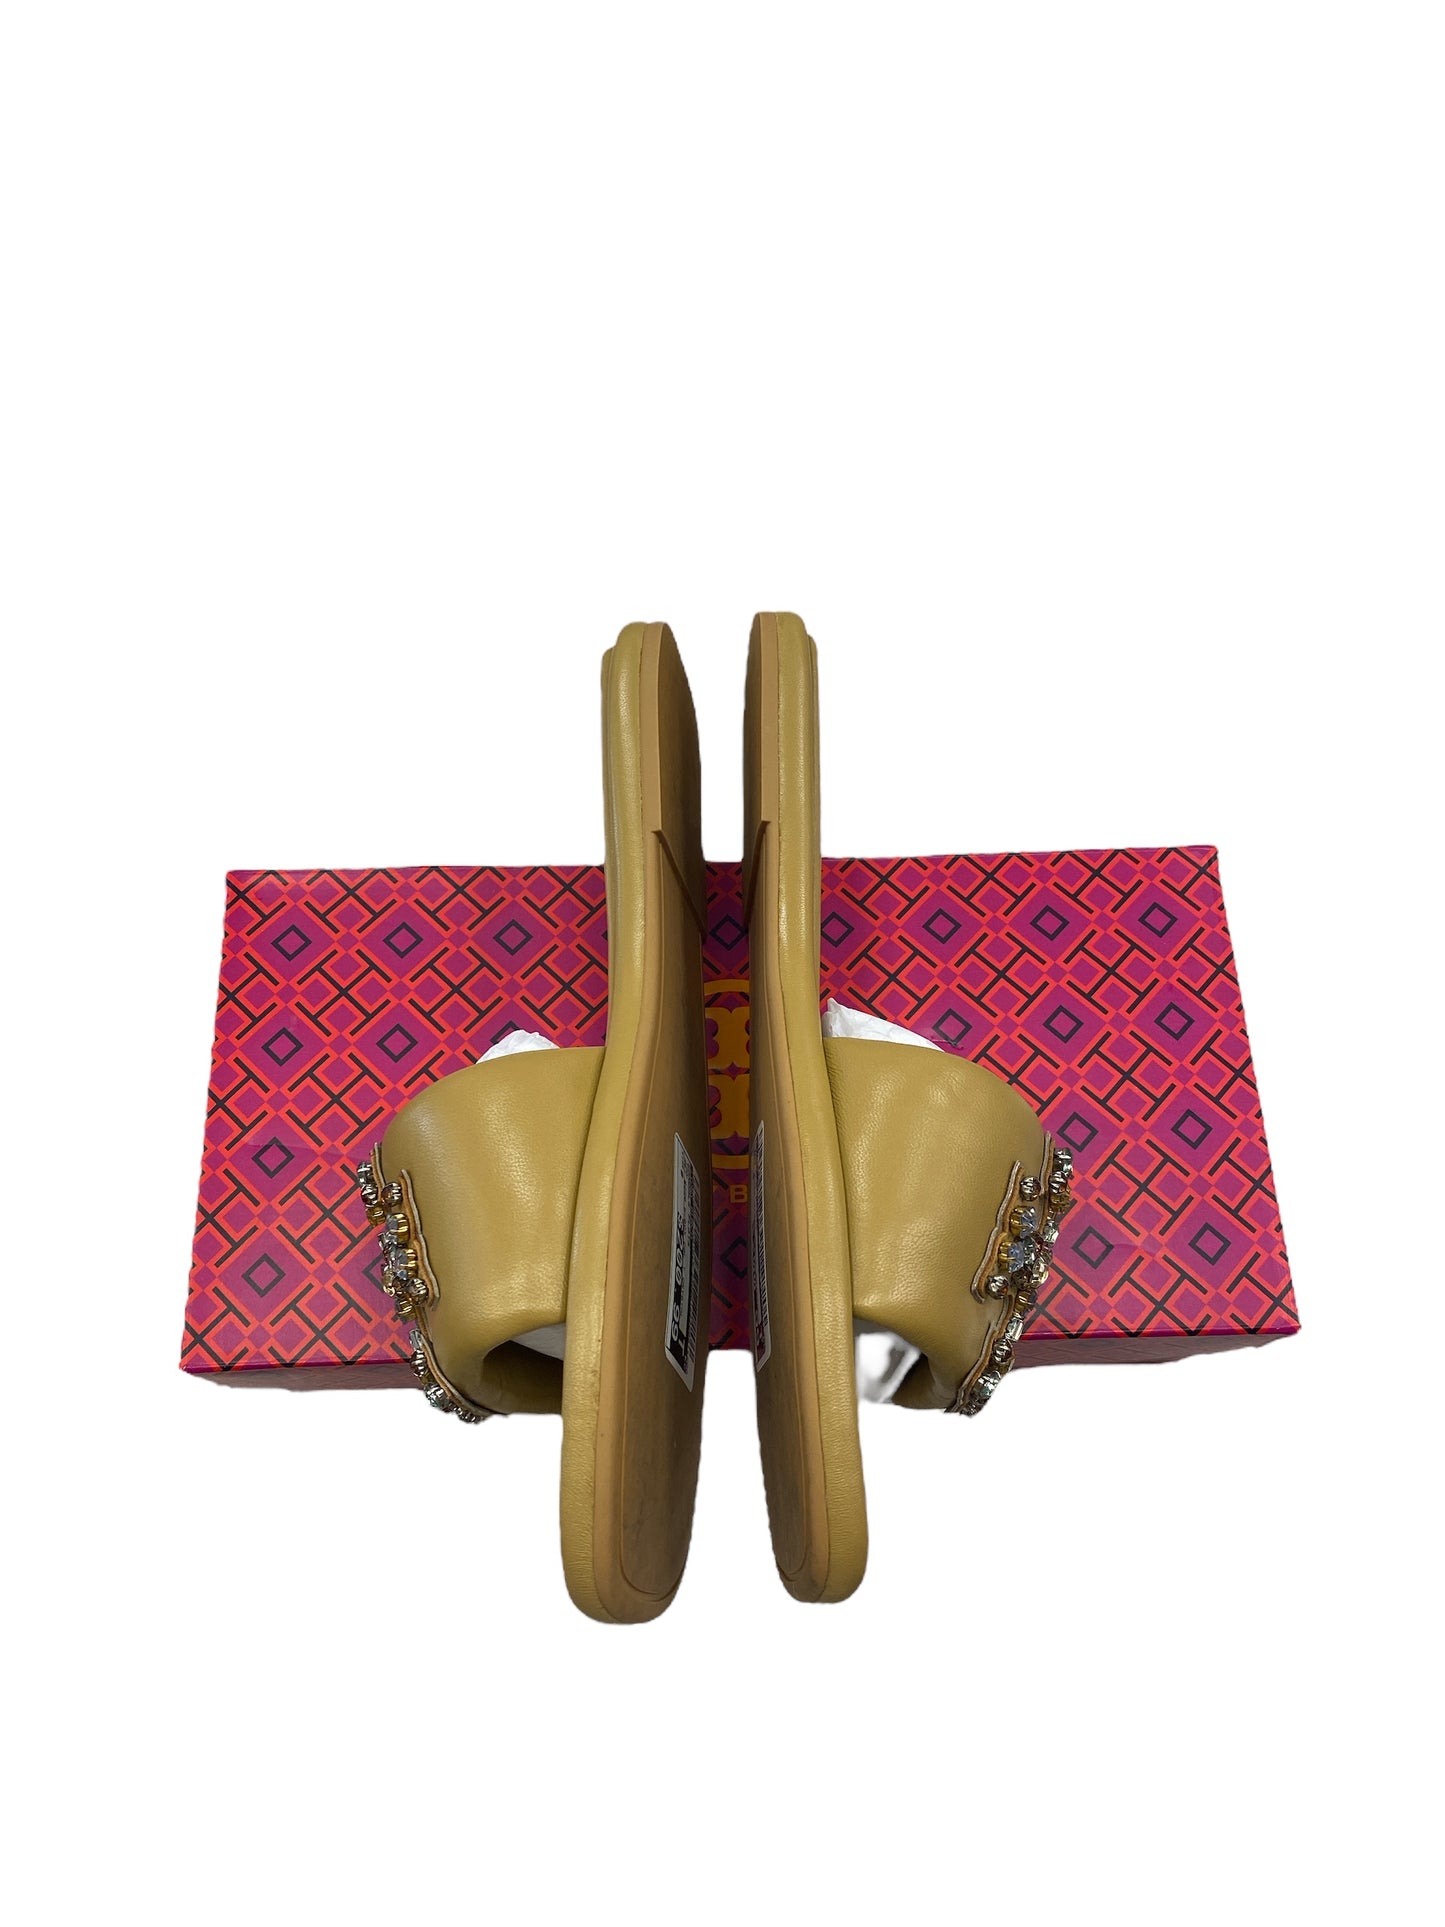 Sandals Flats By Tory Burch  Size: 9